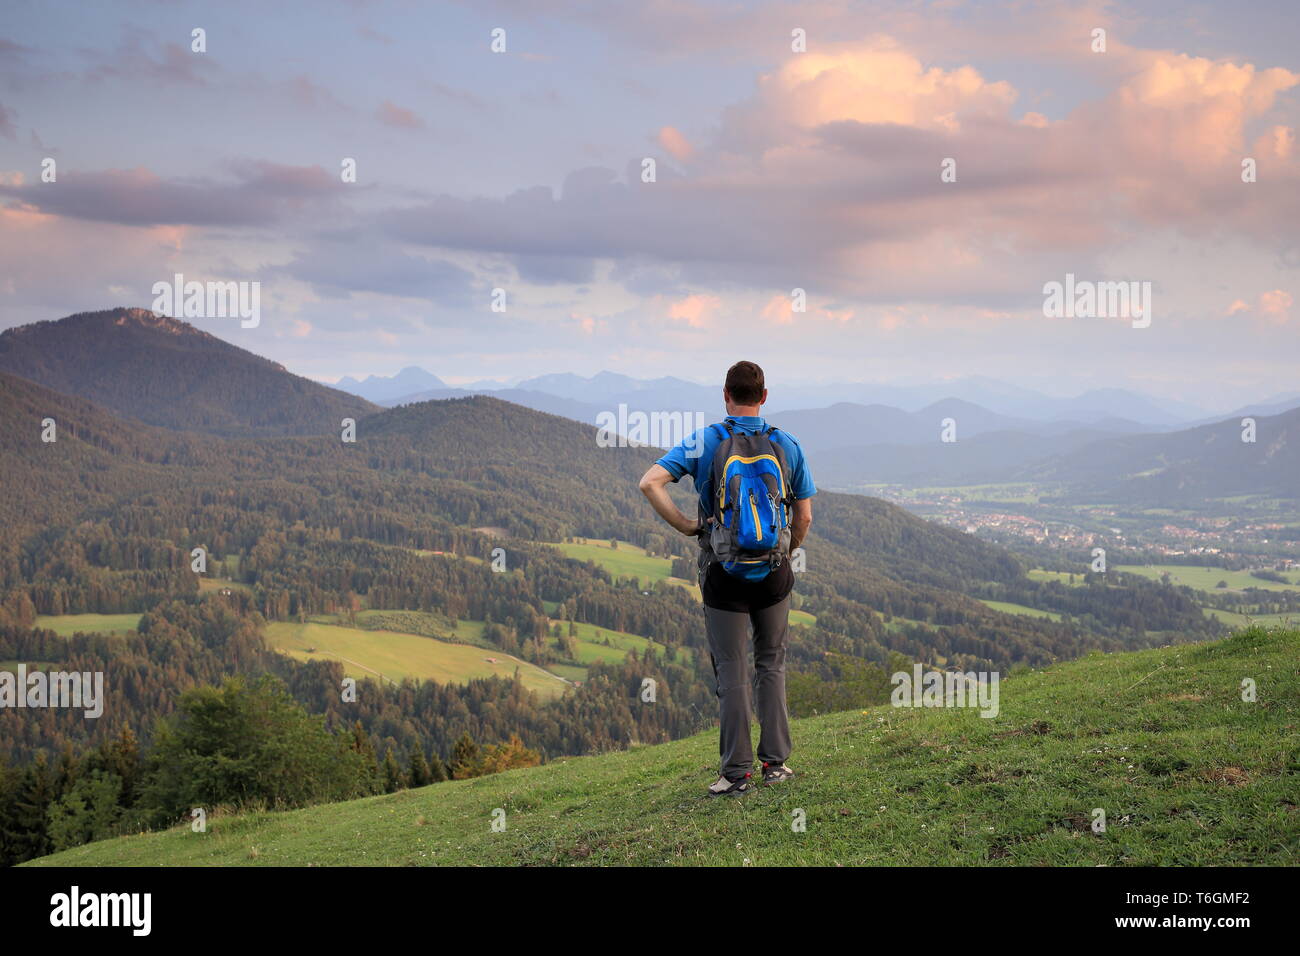 hiker in nature landscape Stock Photo